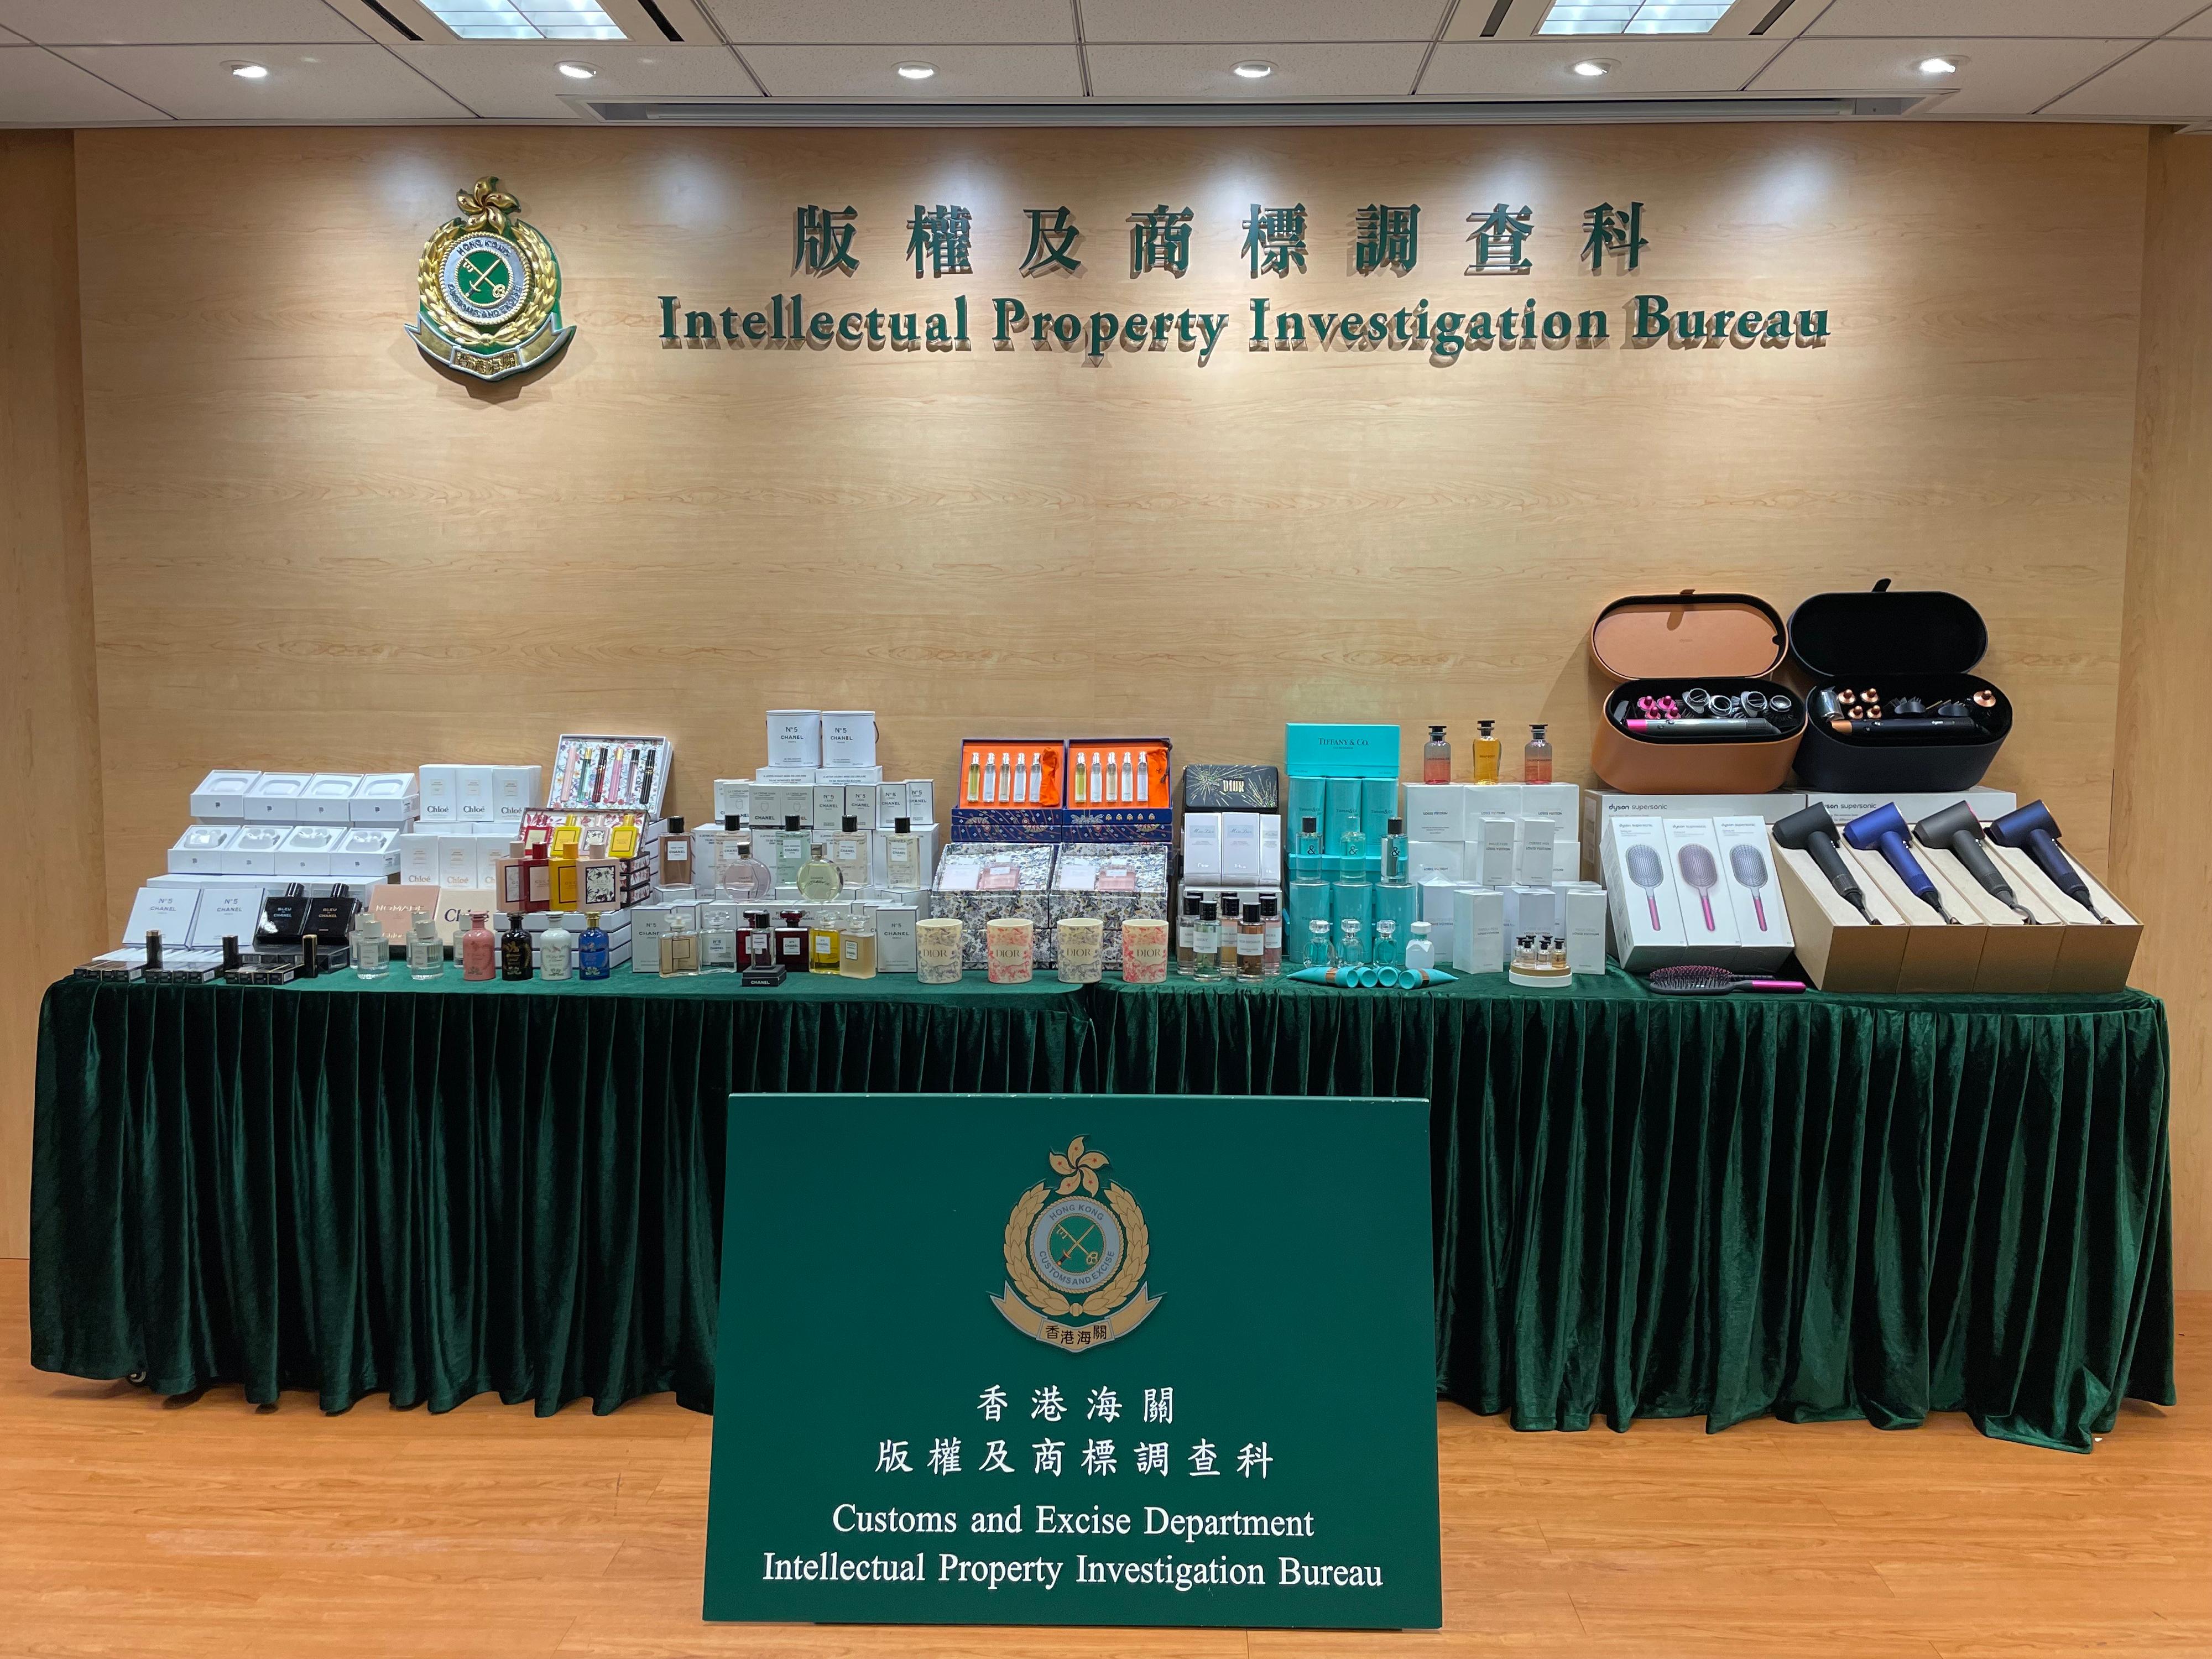 Hong Kong Customs yesterday (February 27) conducted an enforcement operation to combat the online sale of counterfeit cosmetics products, perfume and electric appliances with seizures of about 1 800 items of suspected counterfeit products with an estimated market value of about $330,000. Photo shows some of the suspected counterfeit products seized.